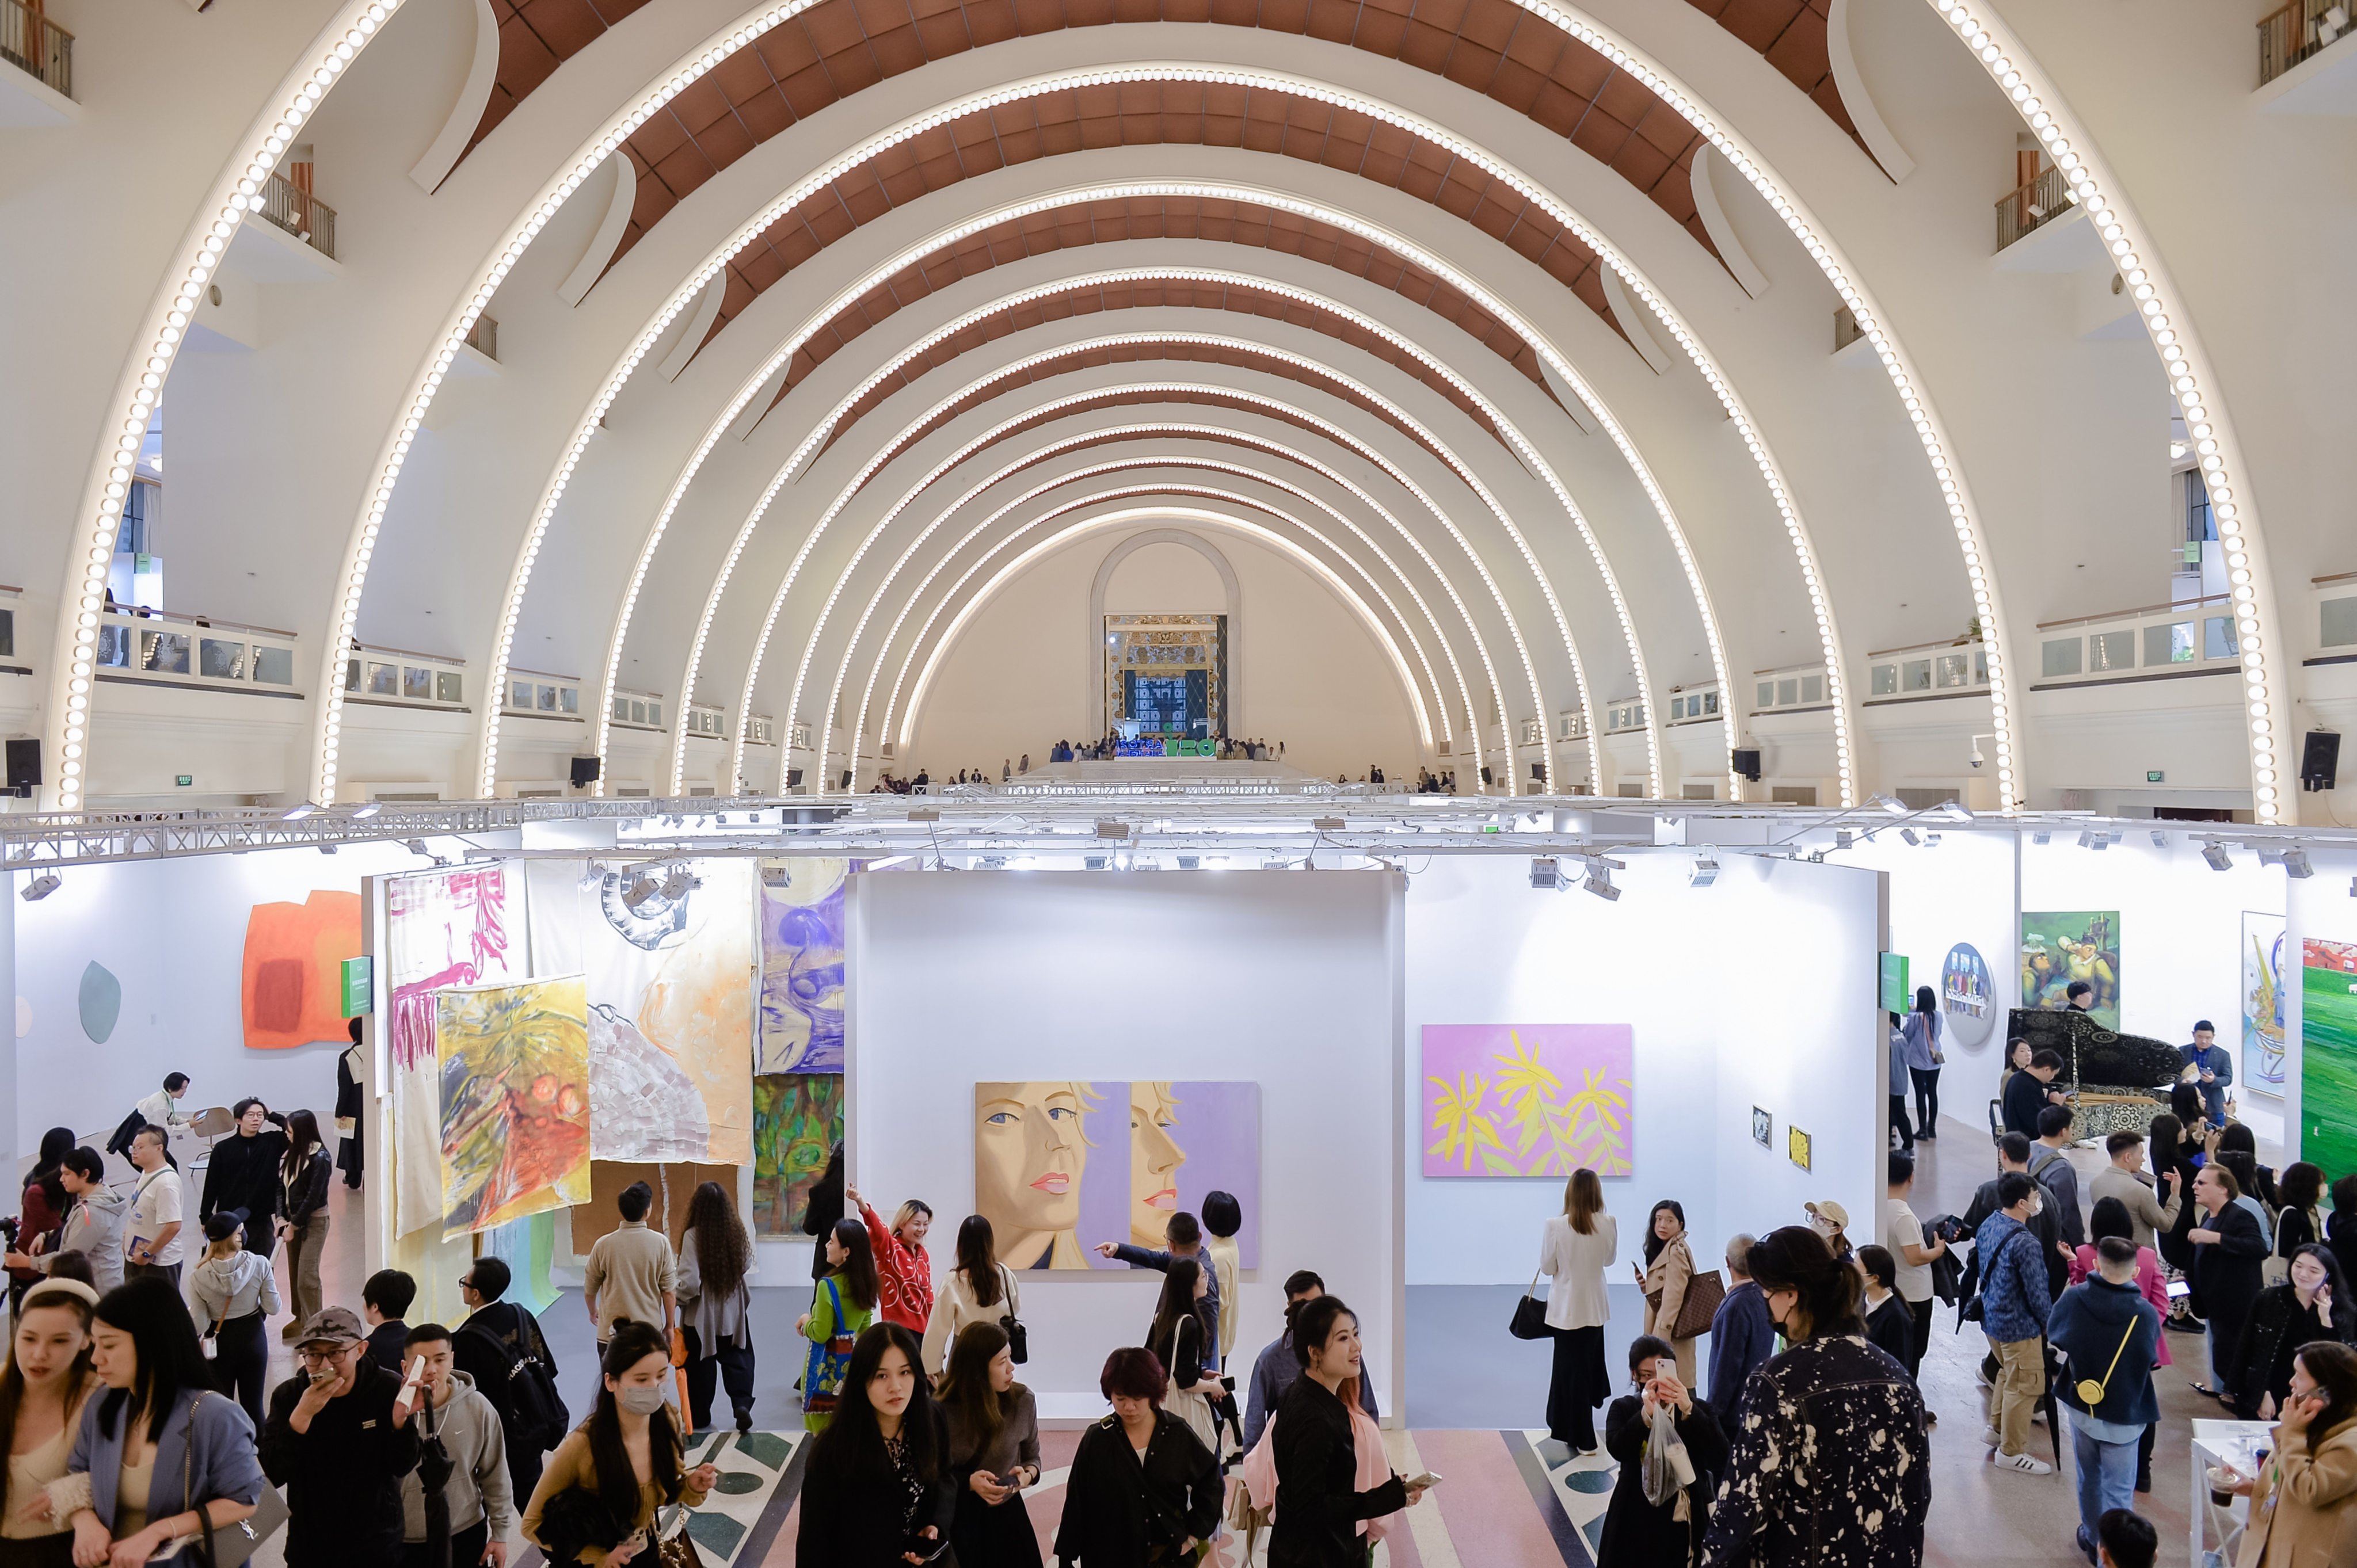 The organisers of the inaugural Art021 Hong Kong art fair have invited gallery owners from China, the Middle East and other countries in the Global South such as India, Brazil, and Pakistan, to increase exposure to their “exceptional” art. Photo: Art021